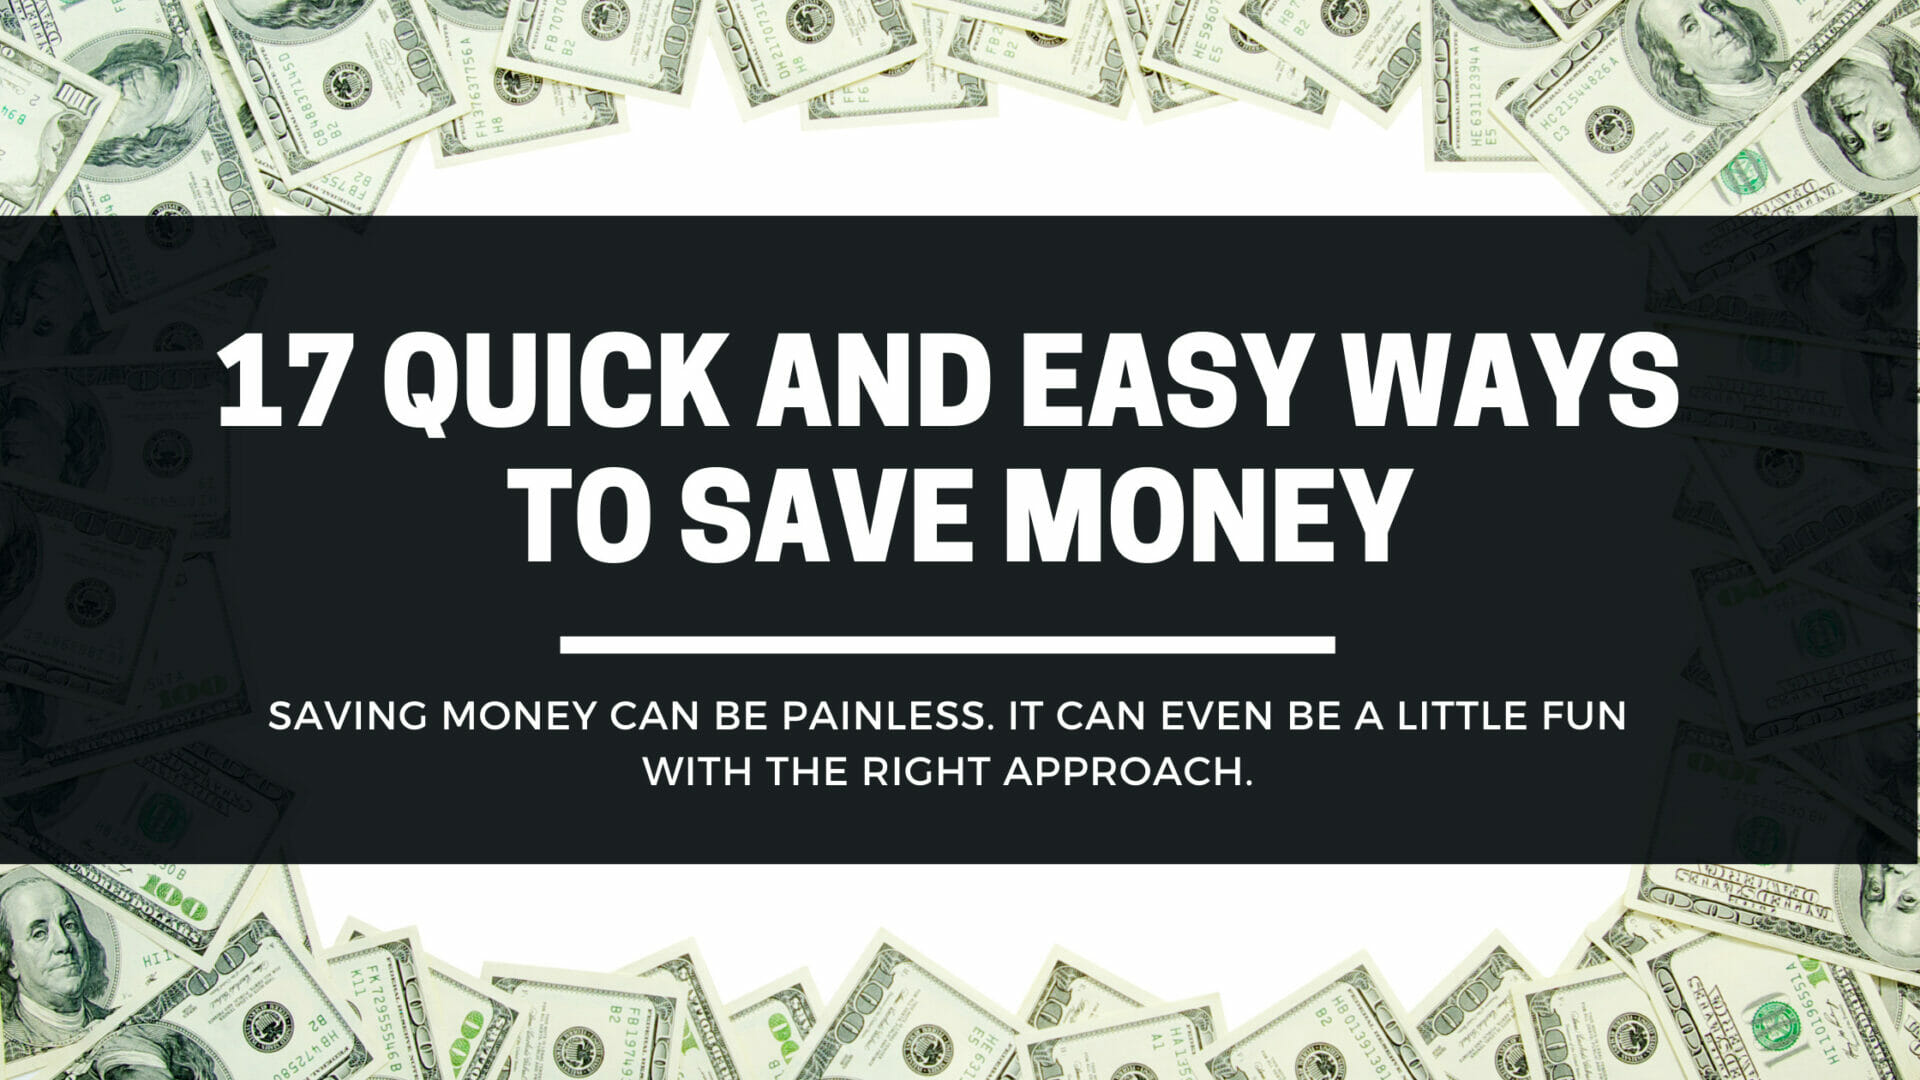 17 Quick And Easy Ways To Save Money